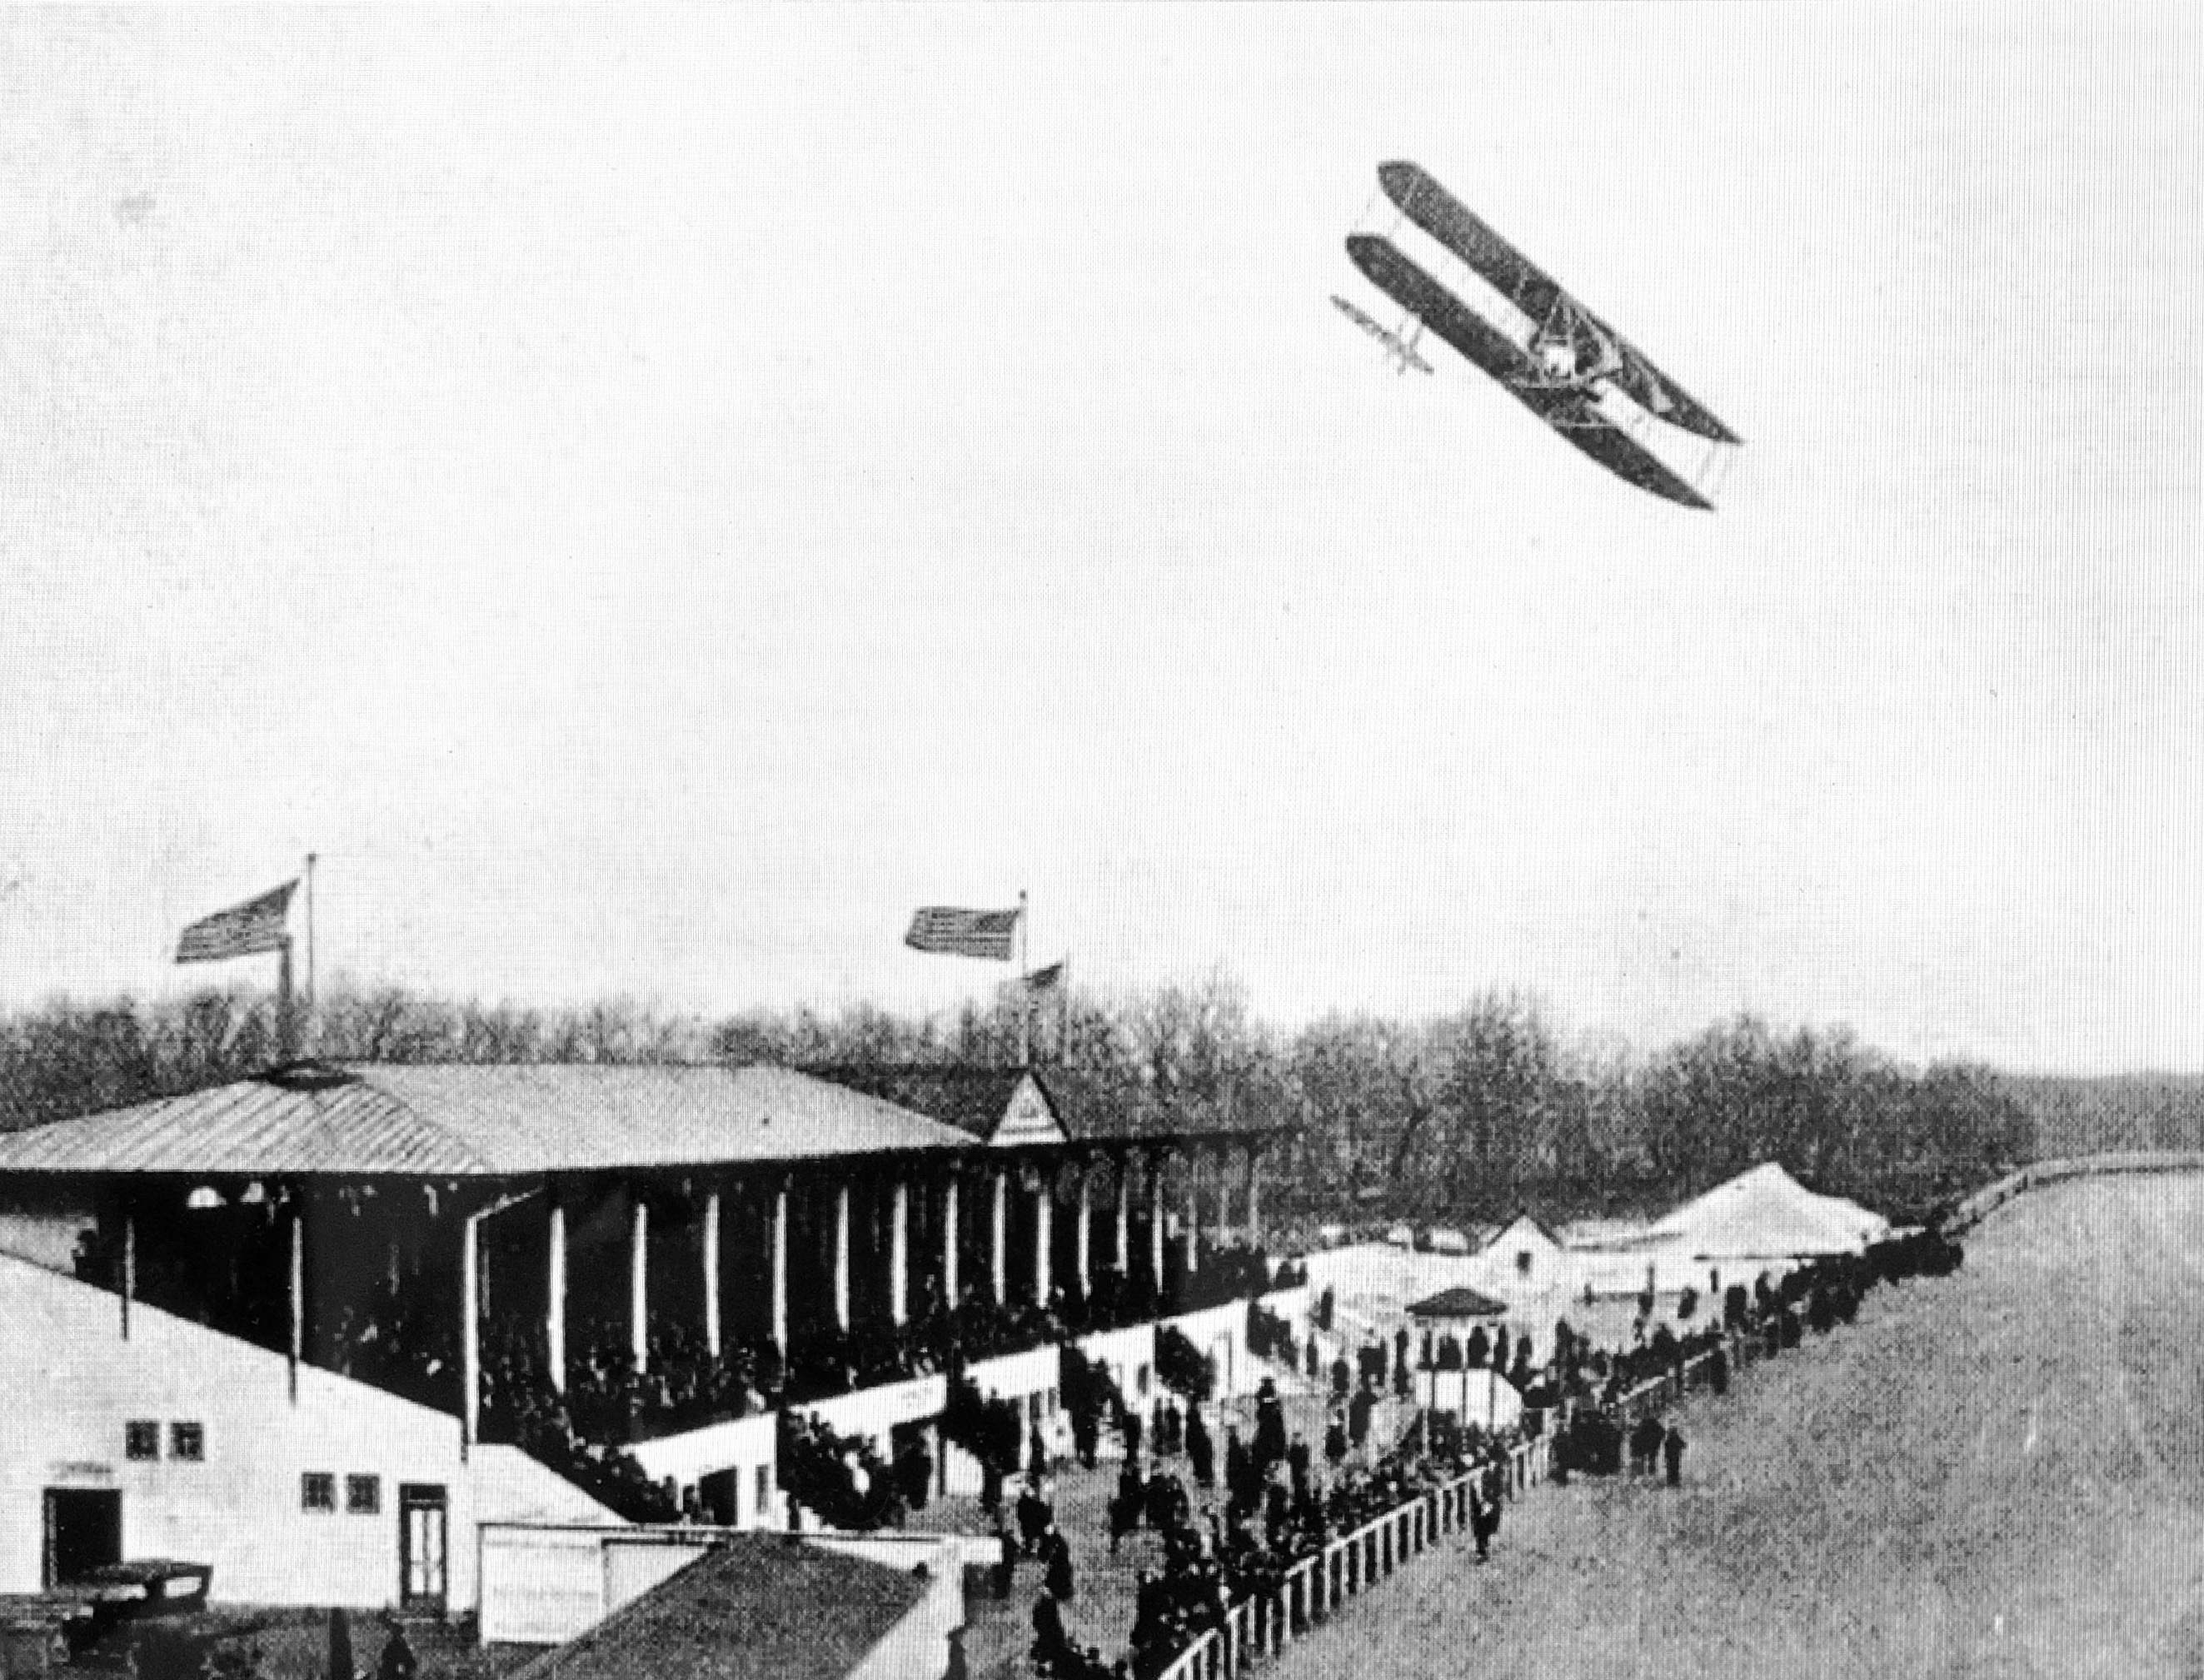 airplane stunts at Overland Park in 1910 